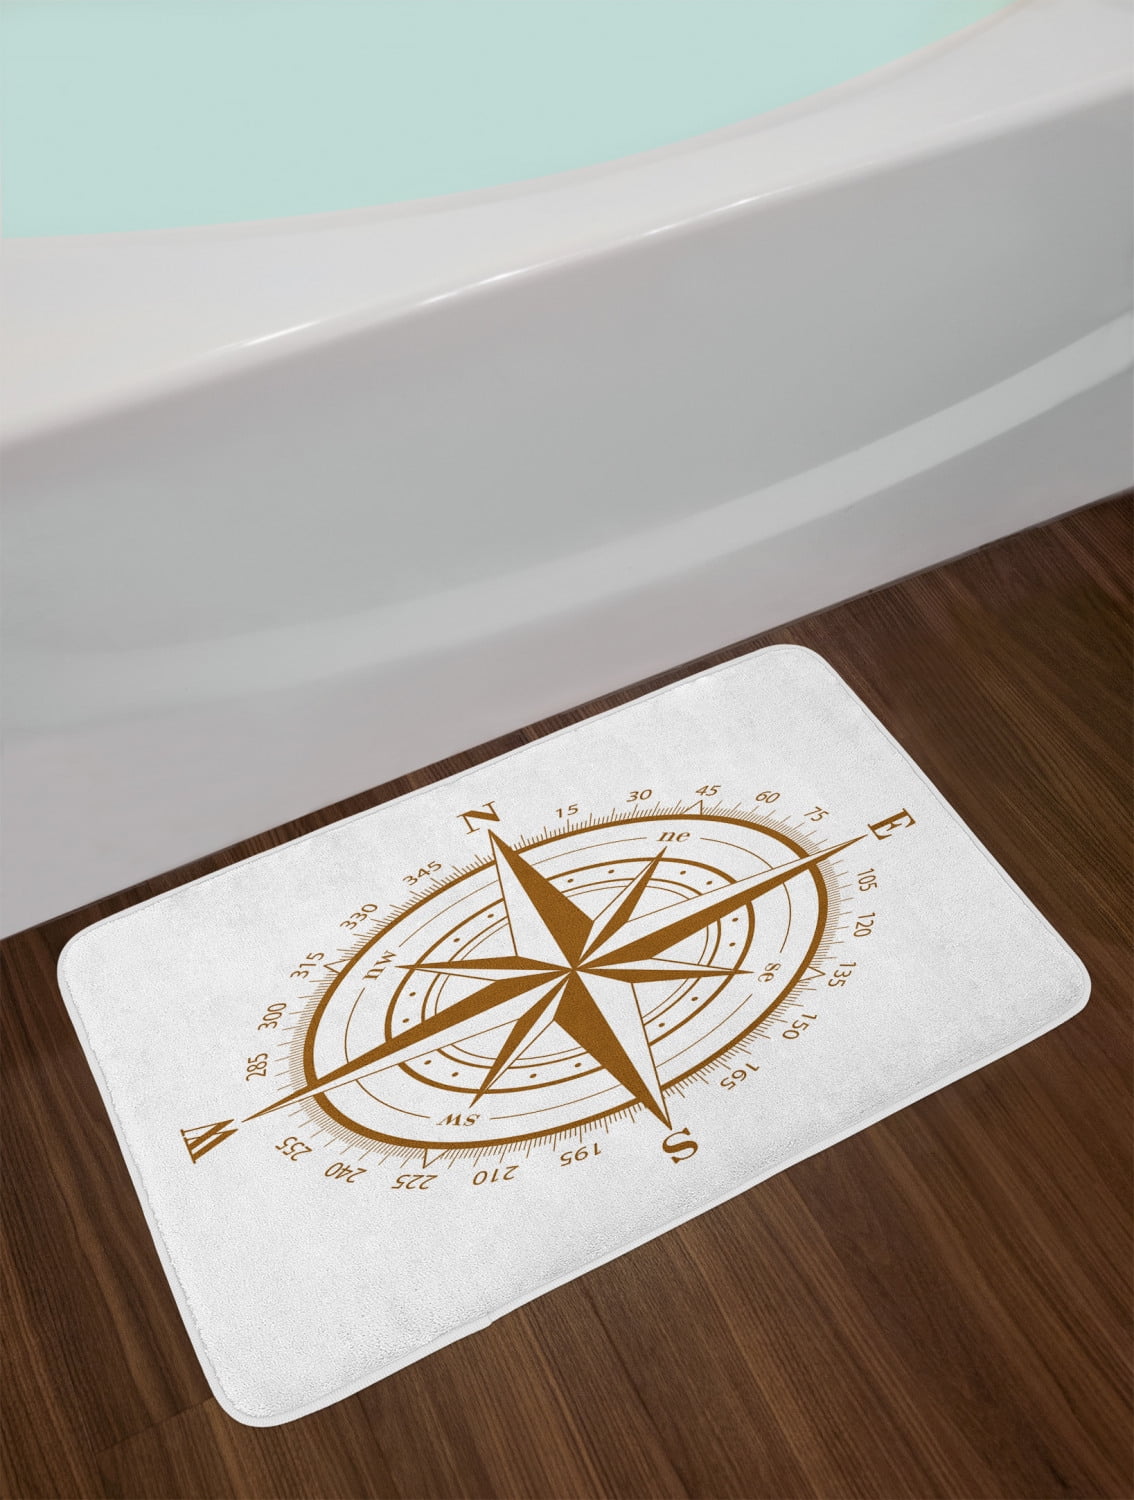 Compass Denim Blue & Brown Bath Mat – Covered By Rugs